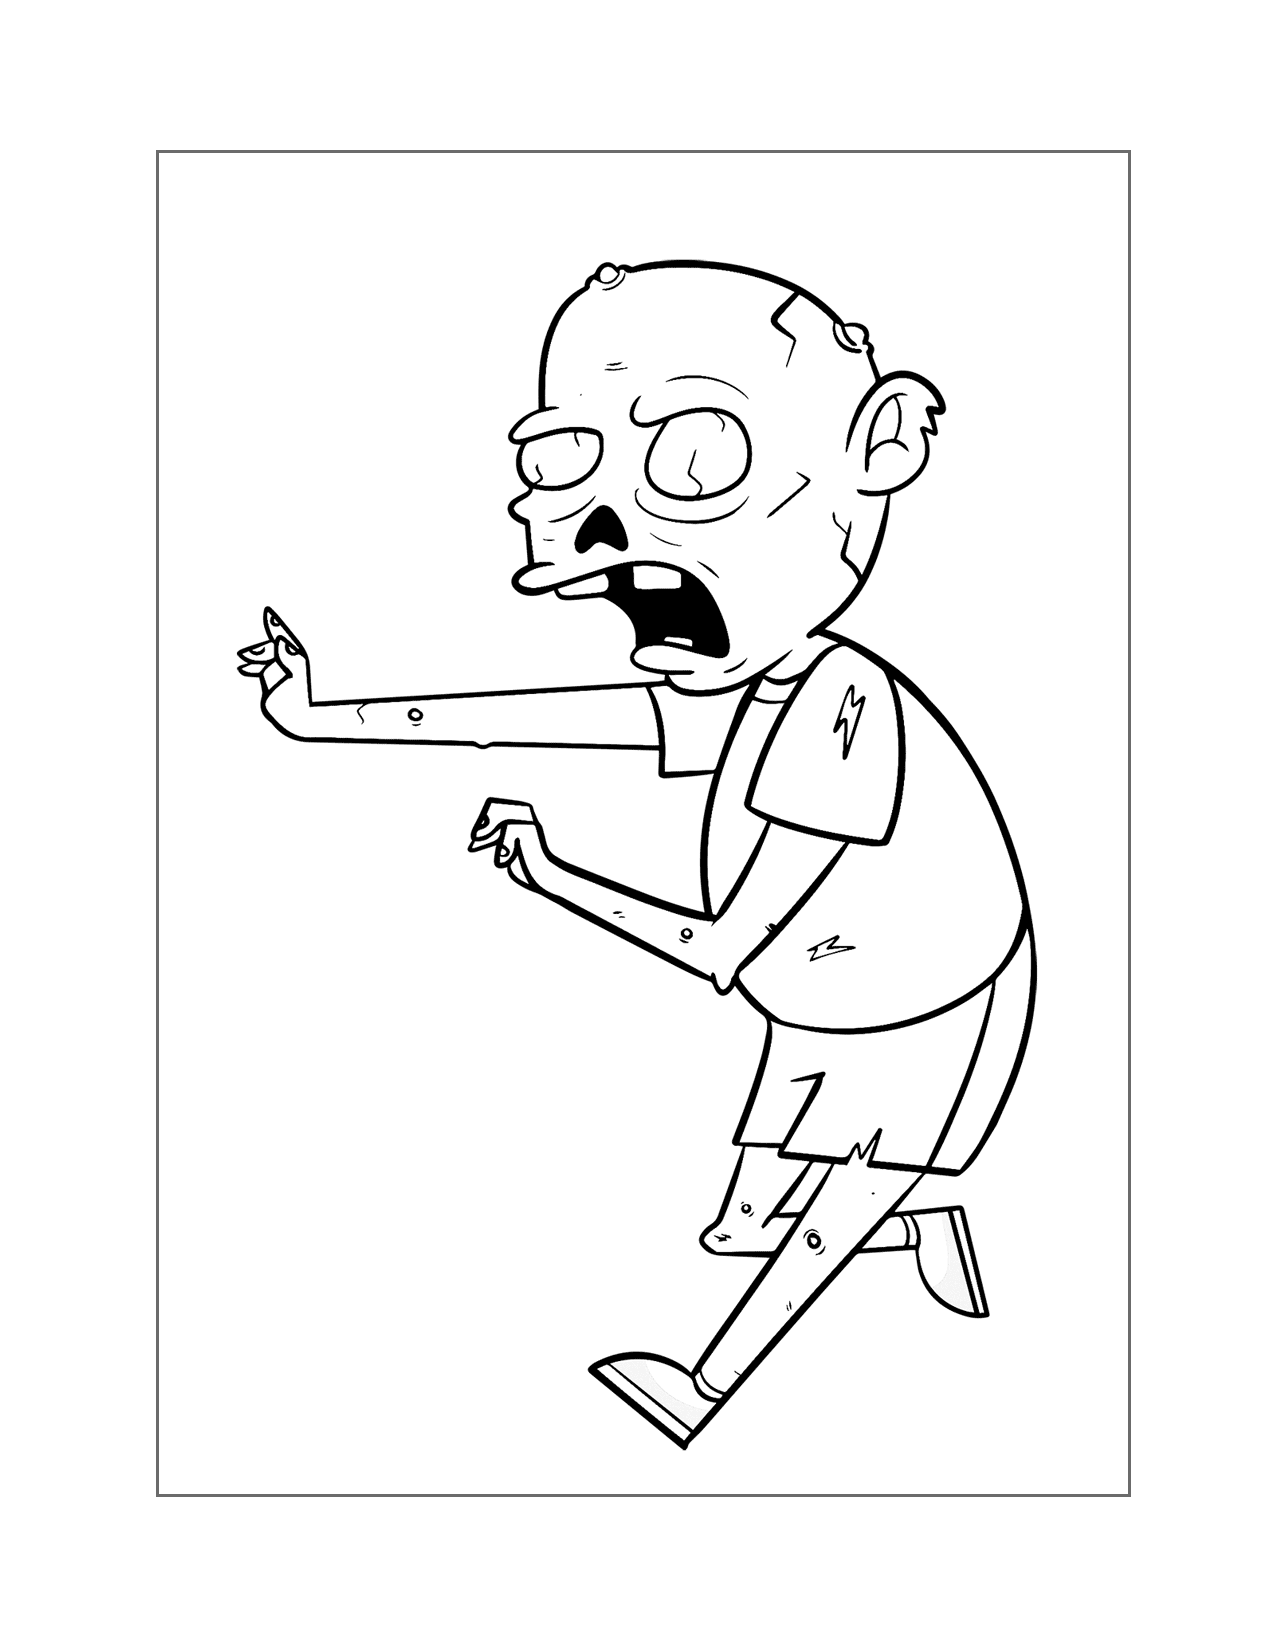 Zombie Man Coloring Page